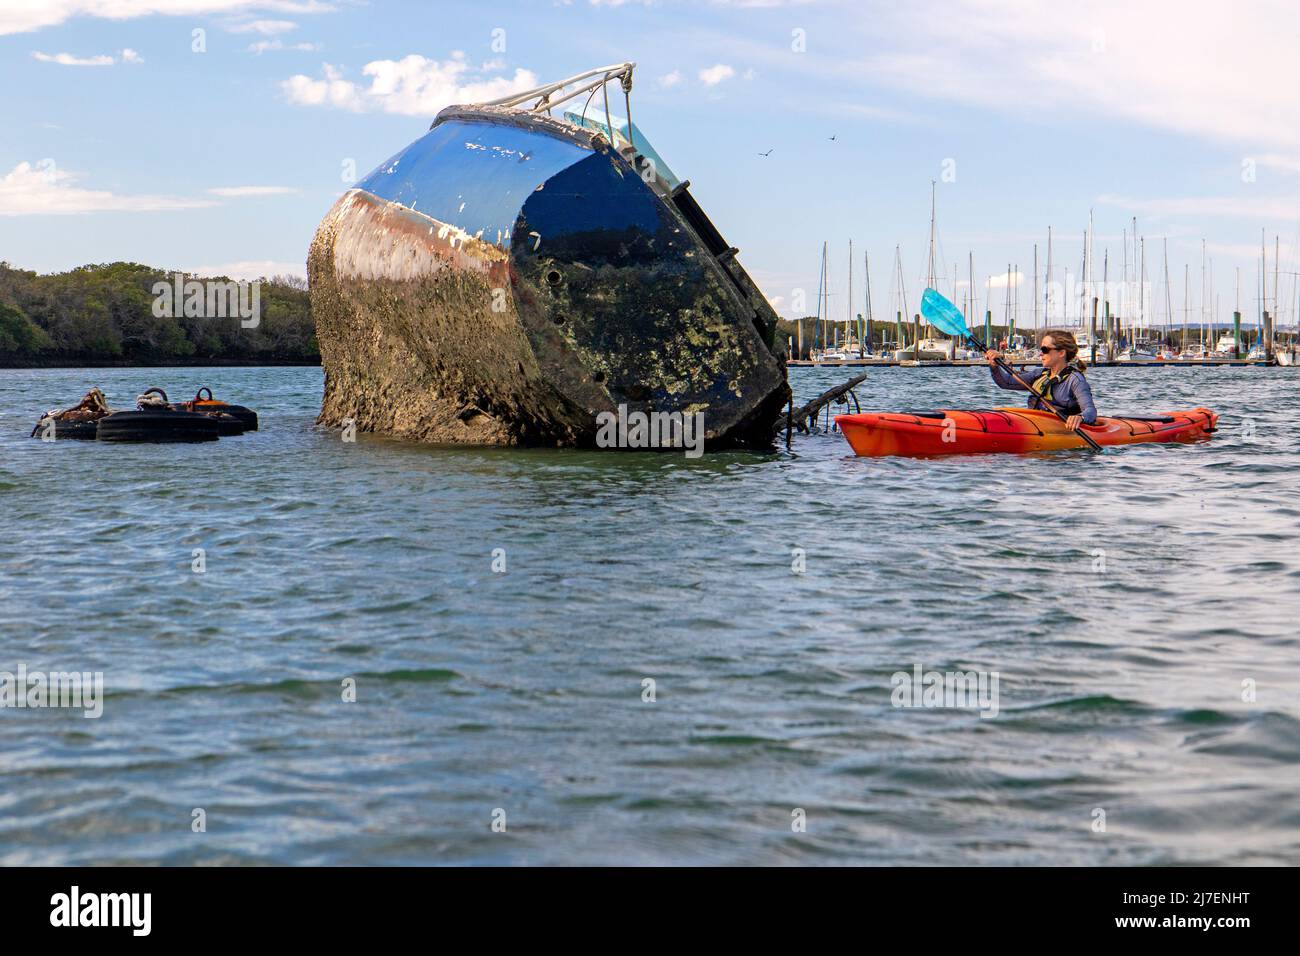 Kayaking past a wrecked yacht in the Port River Stock Photo